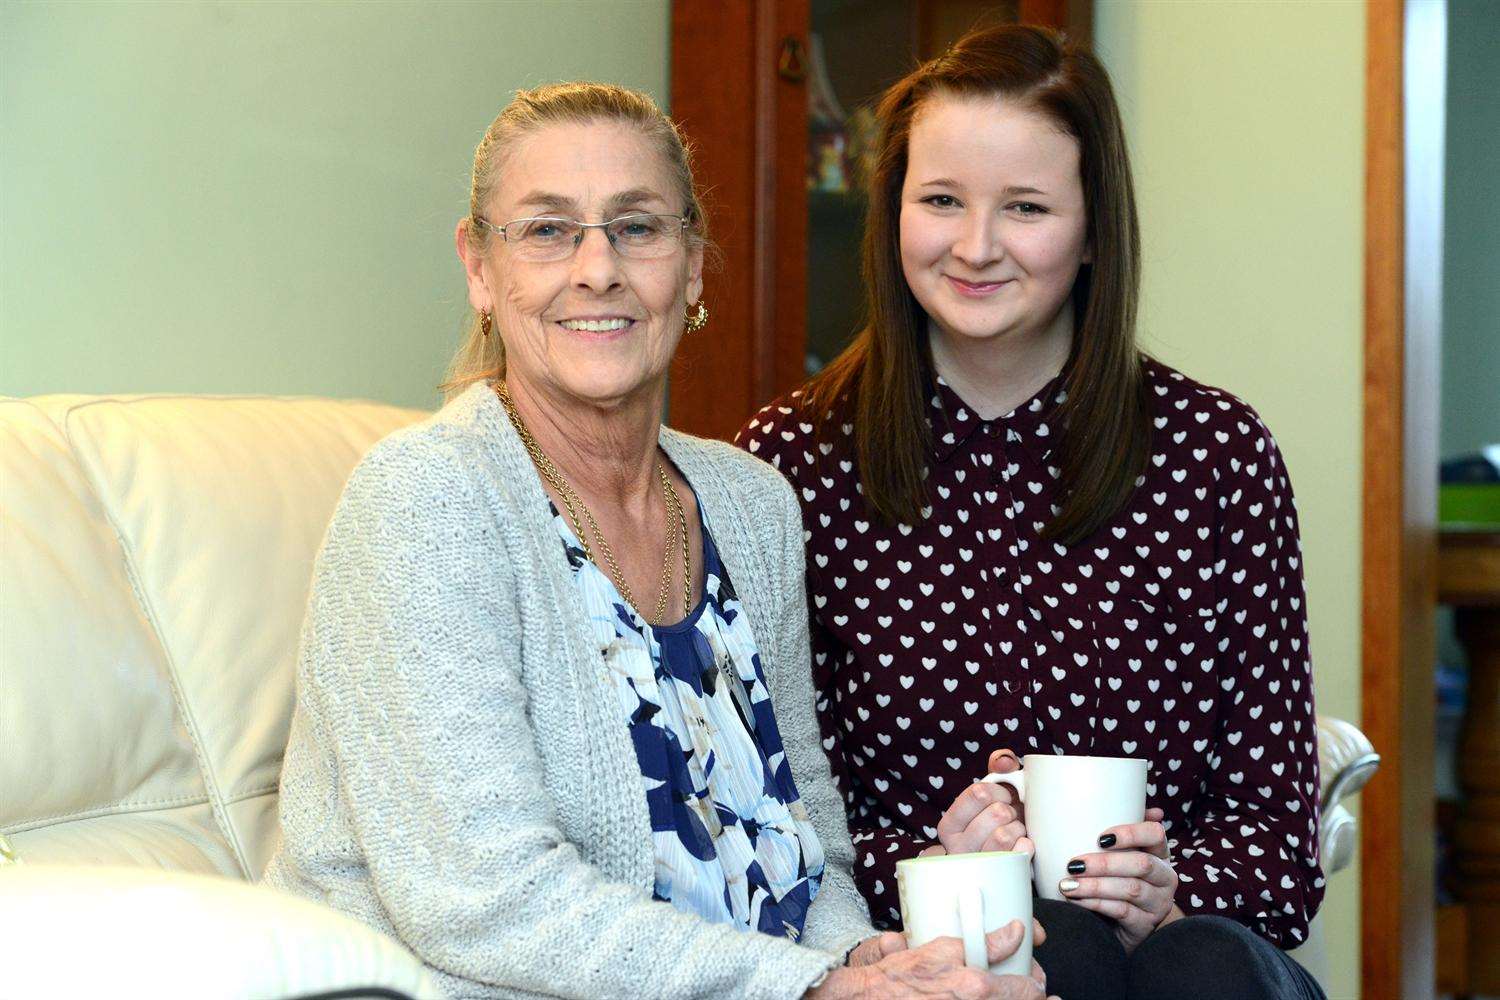 Rachael Fagg, right, was on her way home from school when she saved Pamela Parker from choking